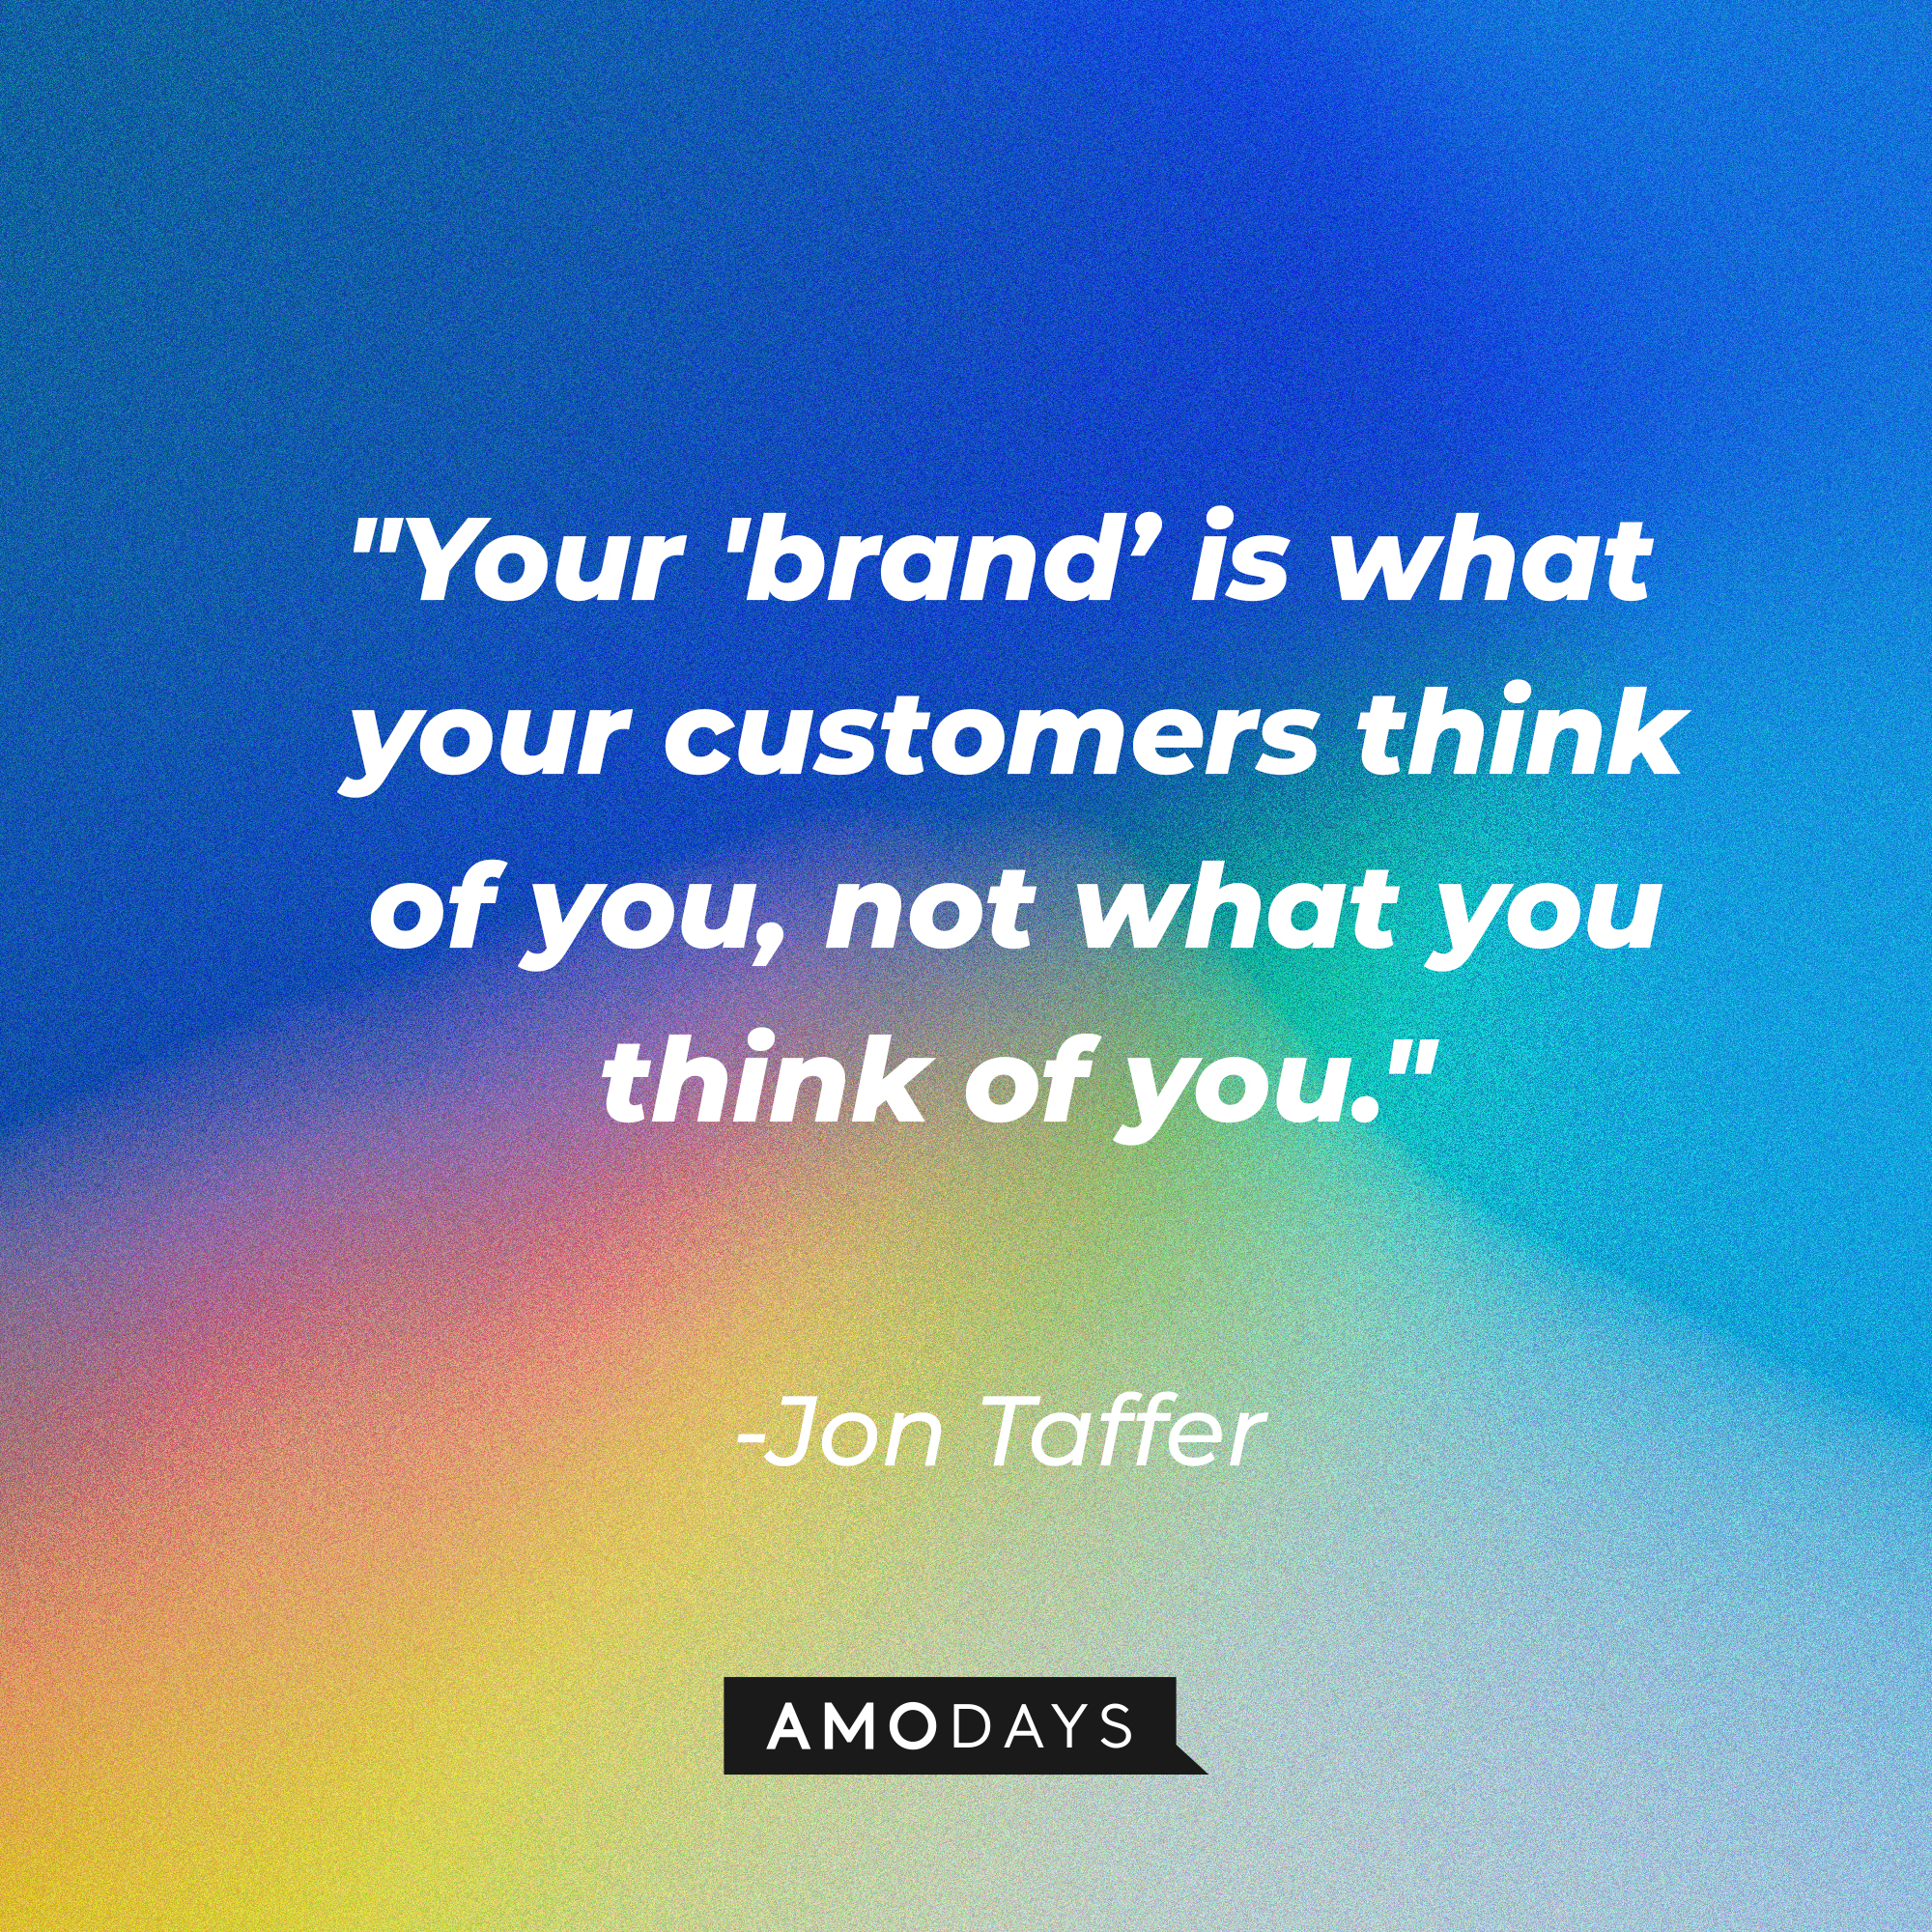 Jon Taffer's quote, "Your 'brand' is what your customers think of you, not what you think of you." | Image: AmoDays